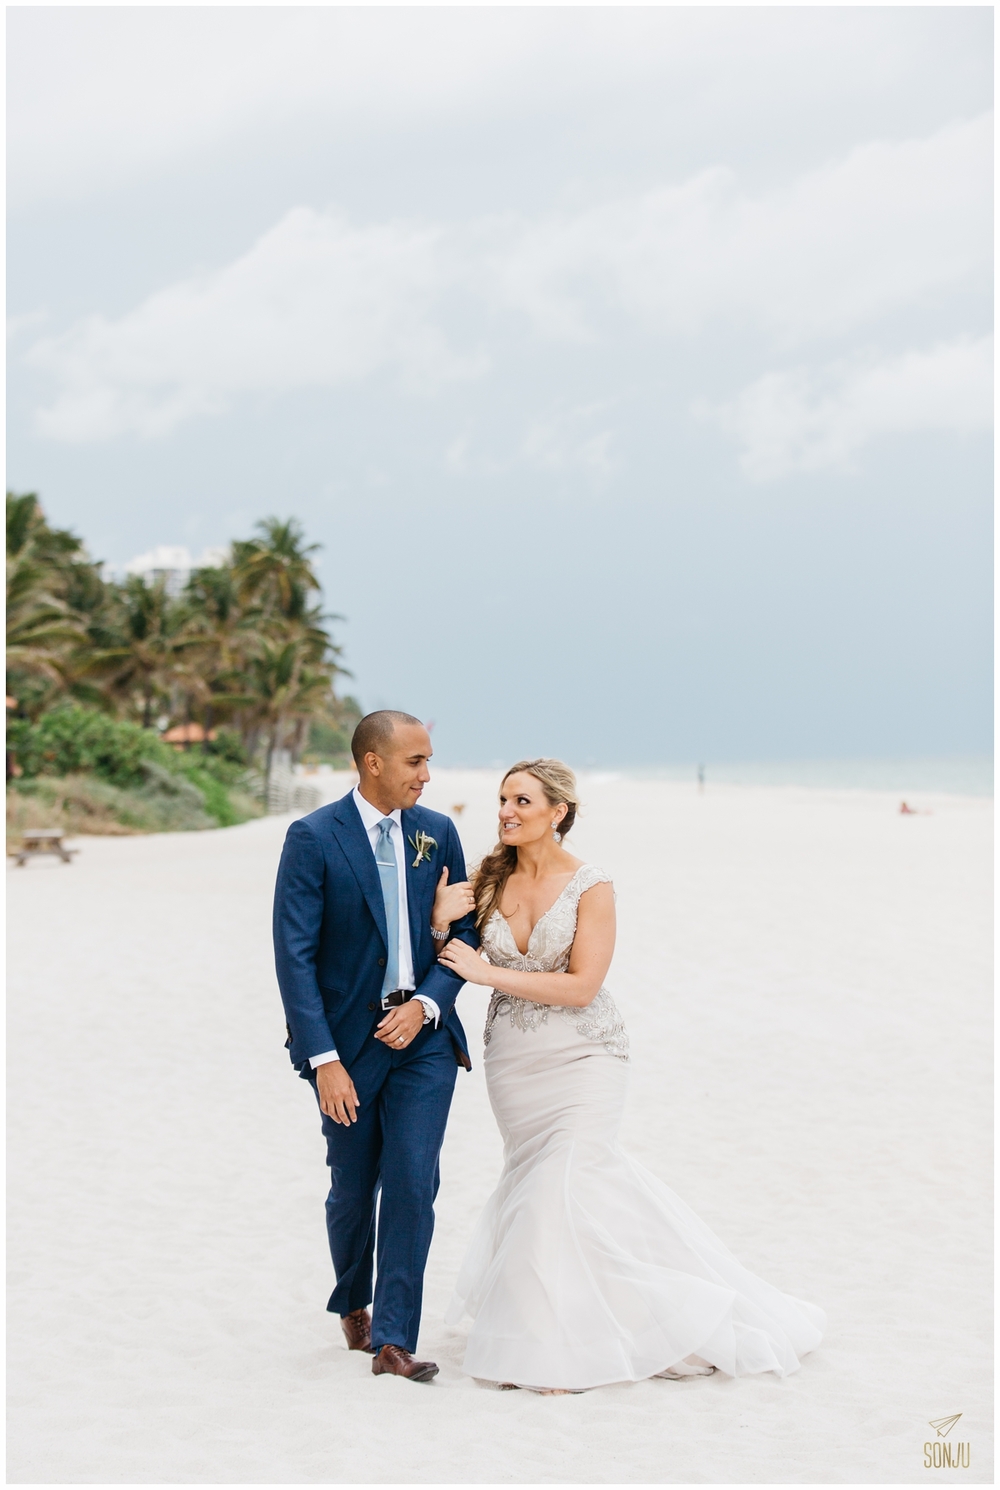 Bride and groom beach portraits at the Pelican Grand Resort Fort Lauderdale Florida